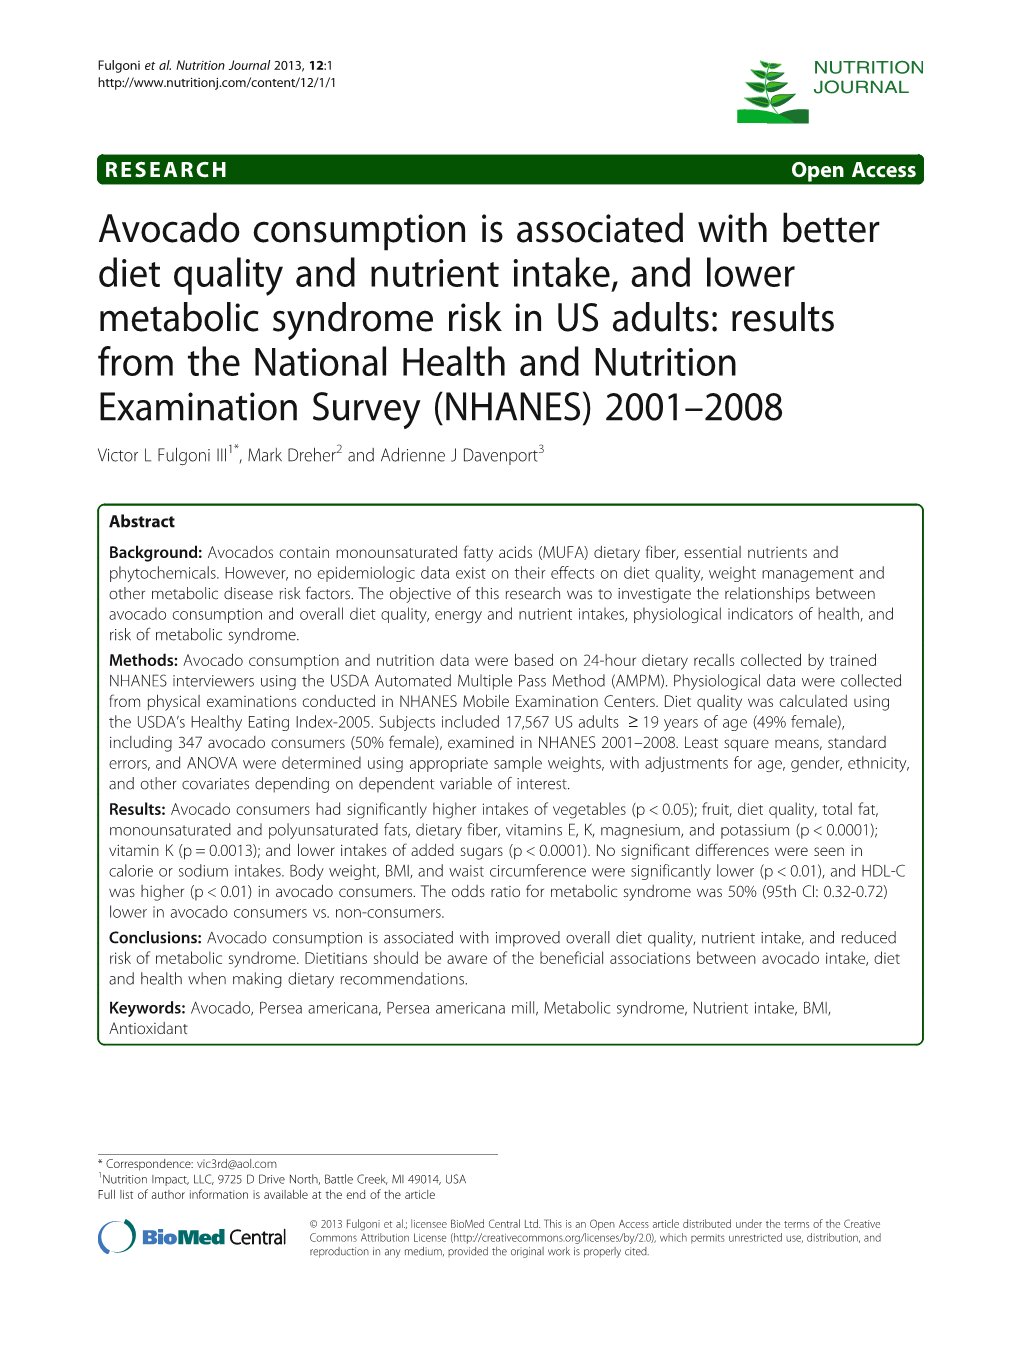 Avocado Consumption Is Associated with Better Diet Quality and Nutrient Intake, and Lower Metabolic Syndrome Risk in US Adults